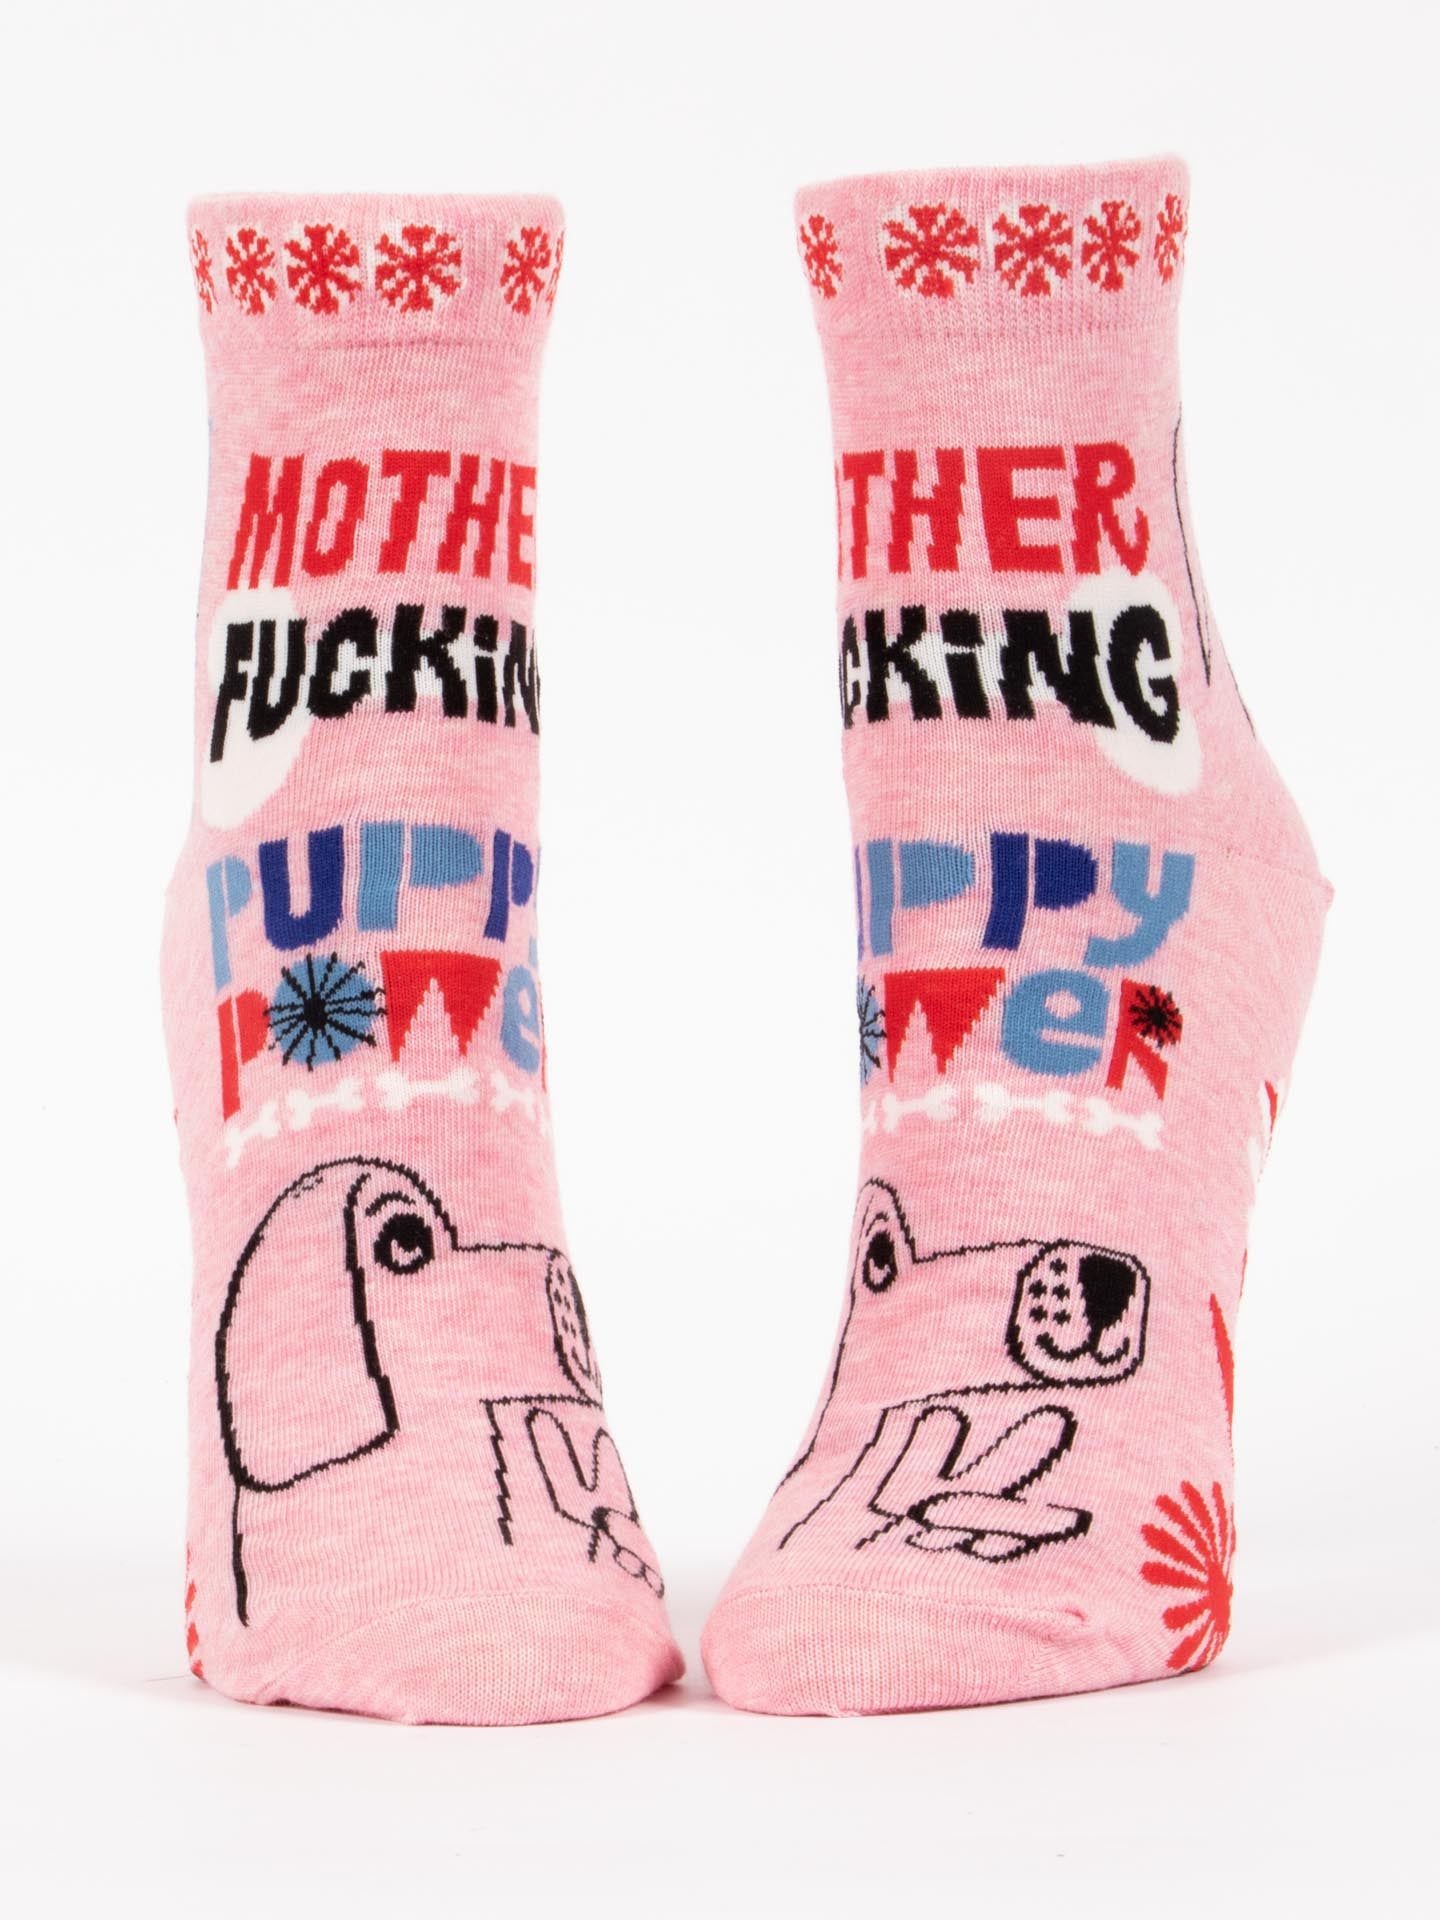 Mother Fucking Puppy Power Women's Ankle Socks-Apparel > Apparel & Accessories > Clothing > Underwear & Socks-Quinn's Mercantile